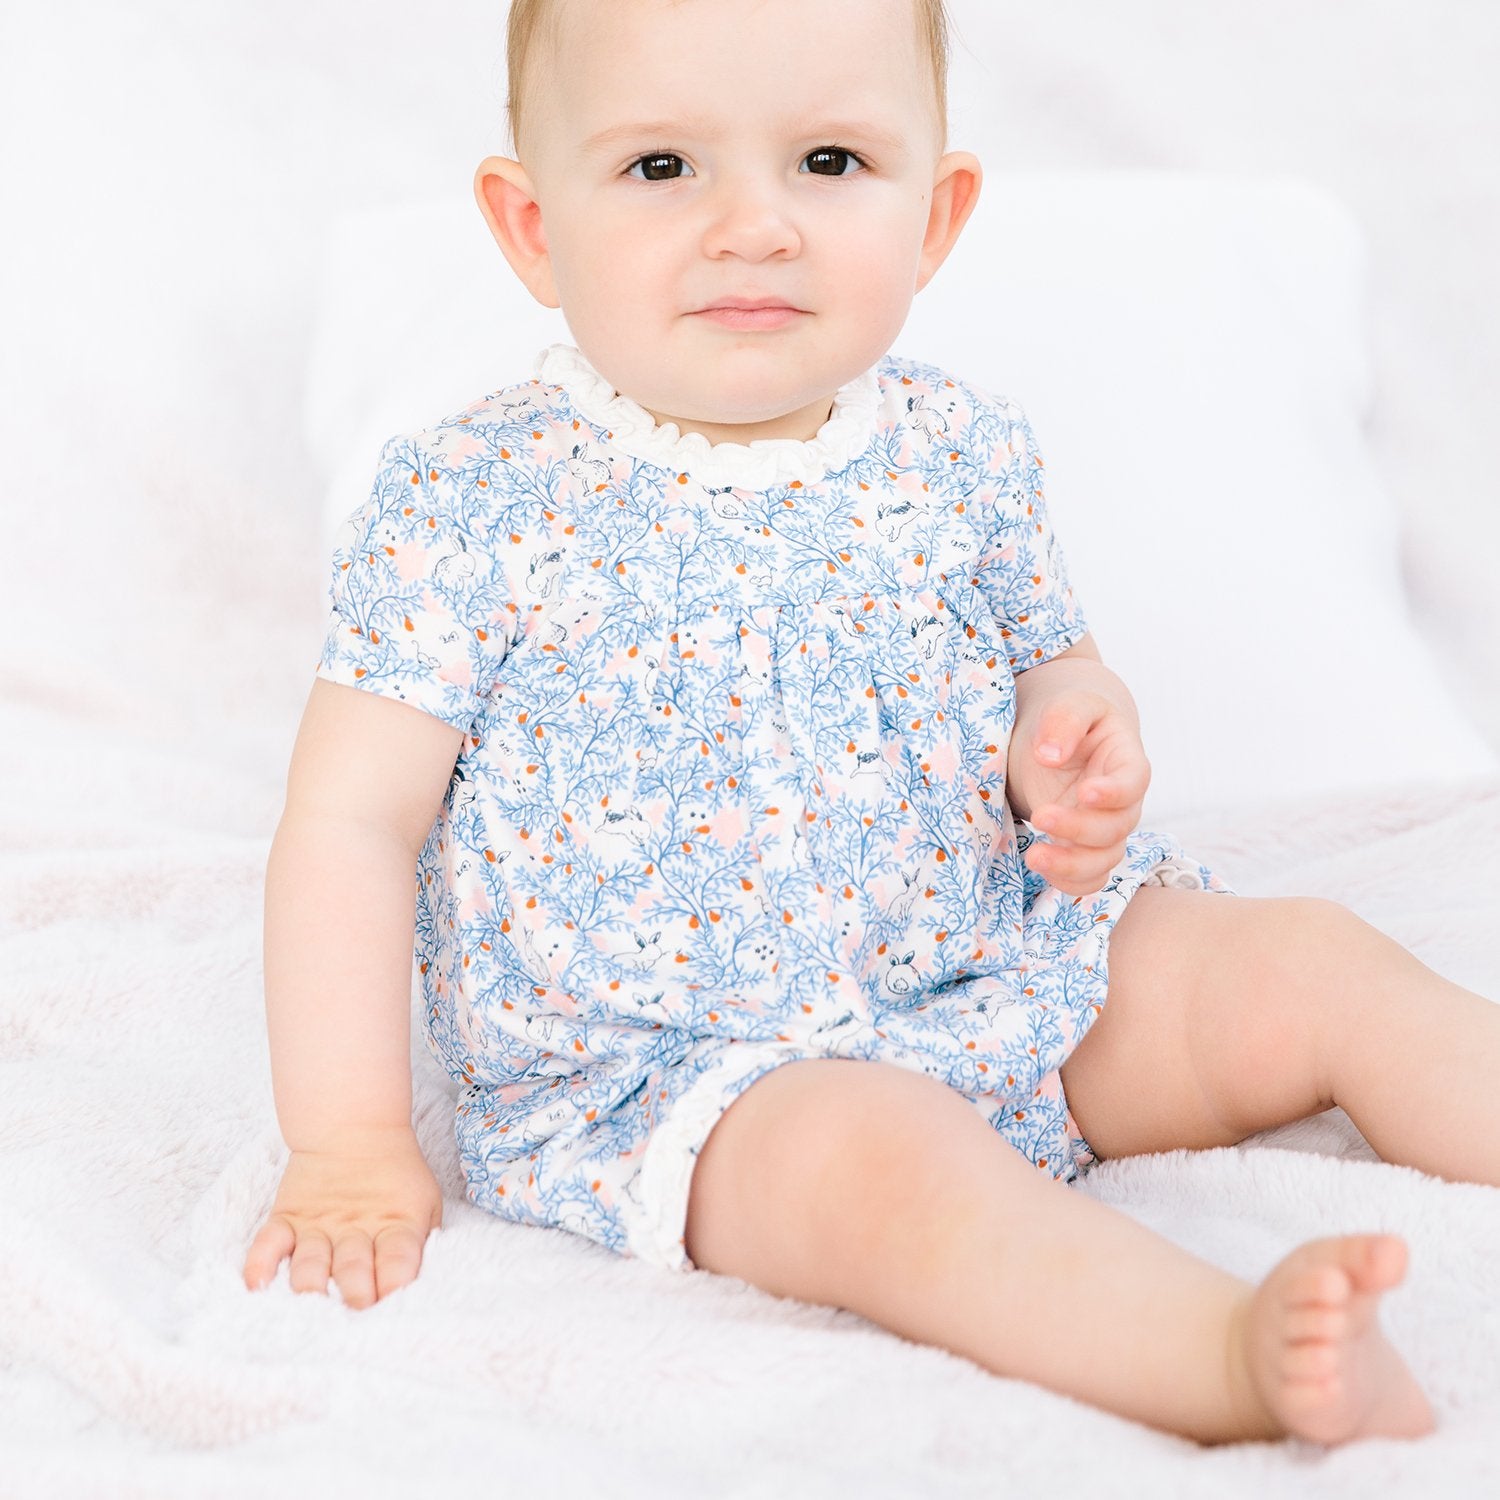 Some Bunny Floral Modal Magnetic Dress and Diaper Cover  - Doodlebug's Children's Boutique